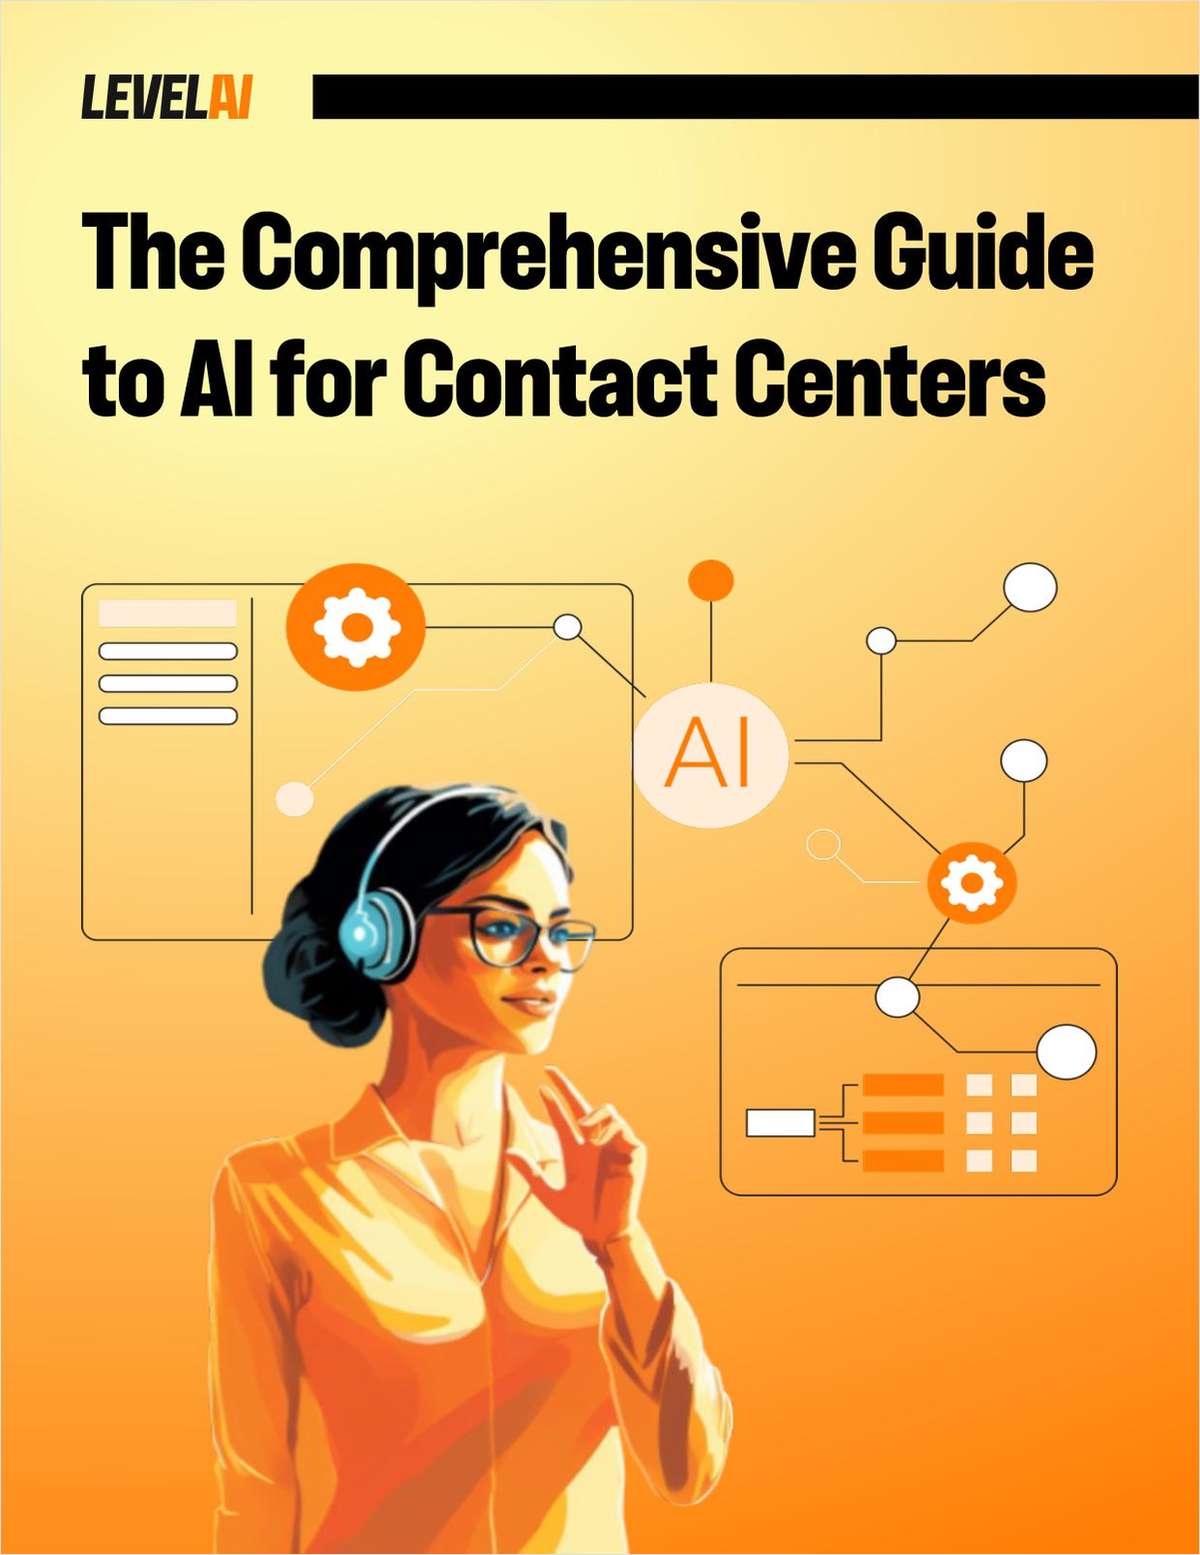 The Comprehensive Guide to AI for Contact Centers